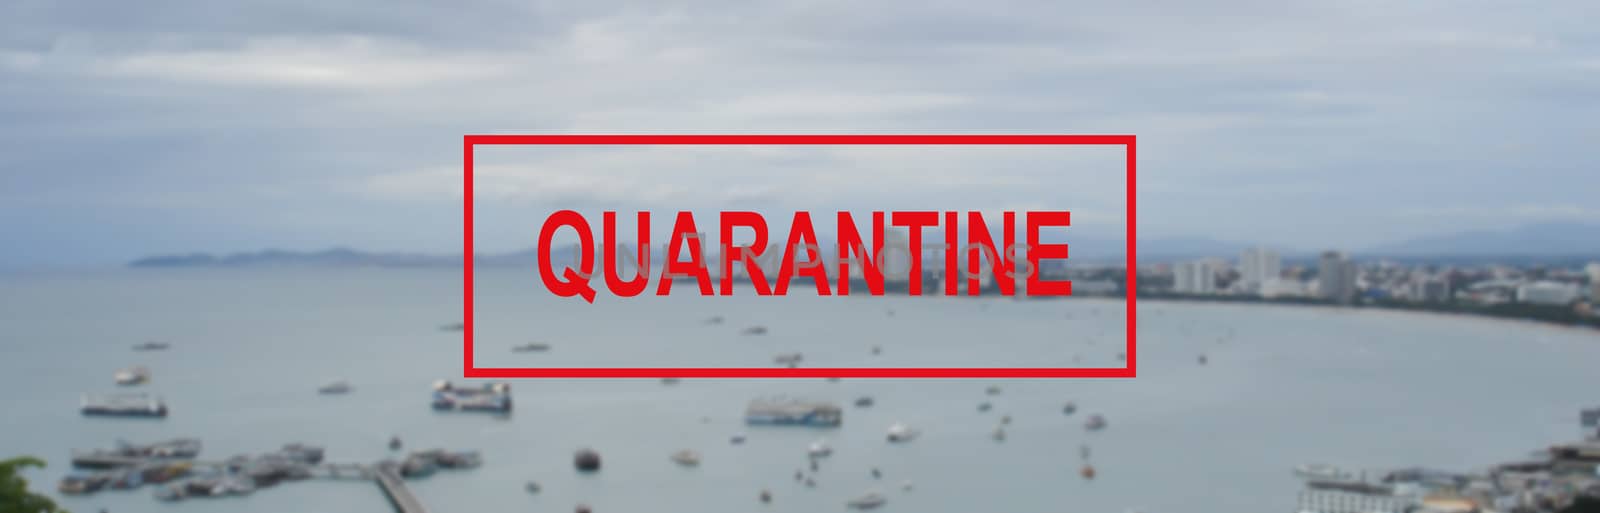 Text warning about quarantine against the background of a Bay view in Pattaya, Thailand. by bonilook